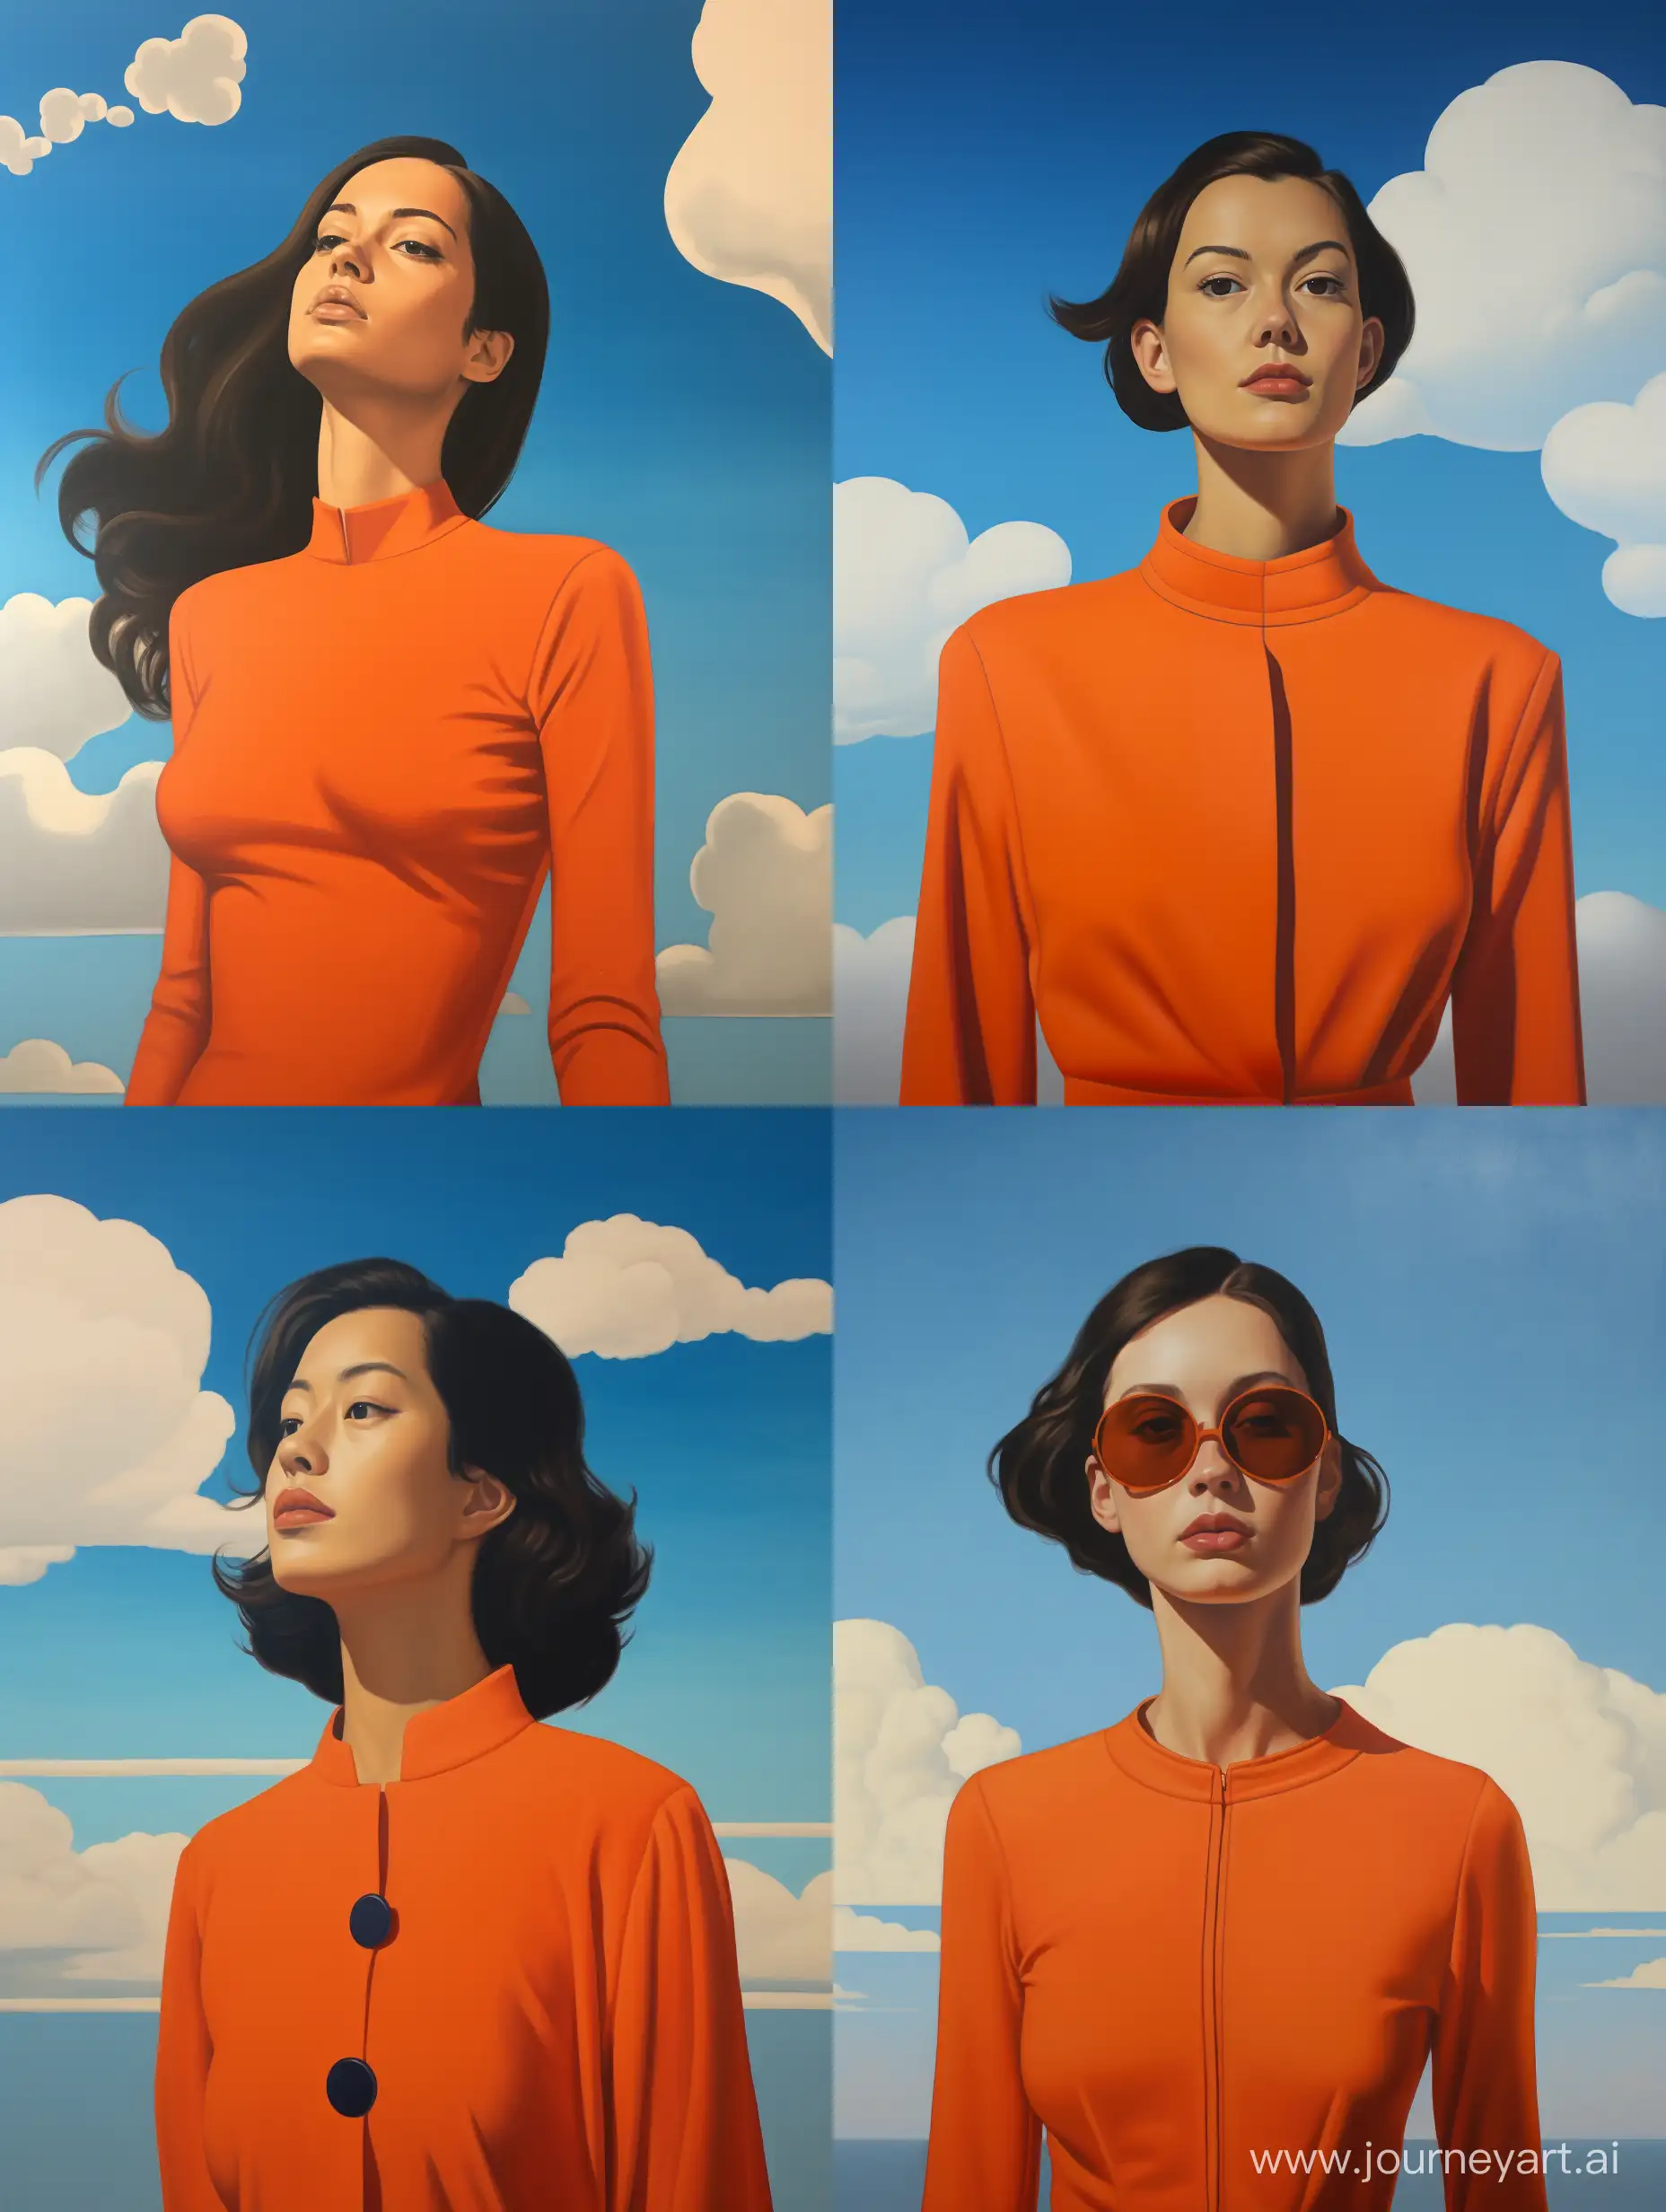 Minimalist painting of a young woman in front in an orange suit, behind her is a background of sky and clouds in blue and orange